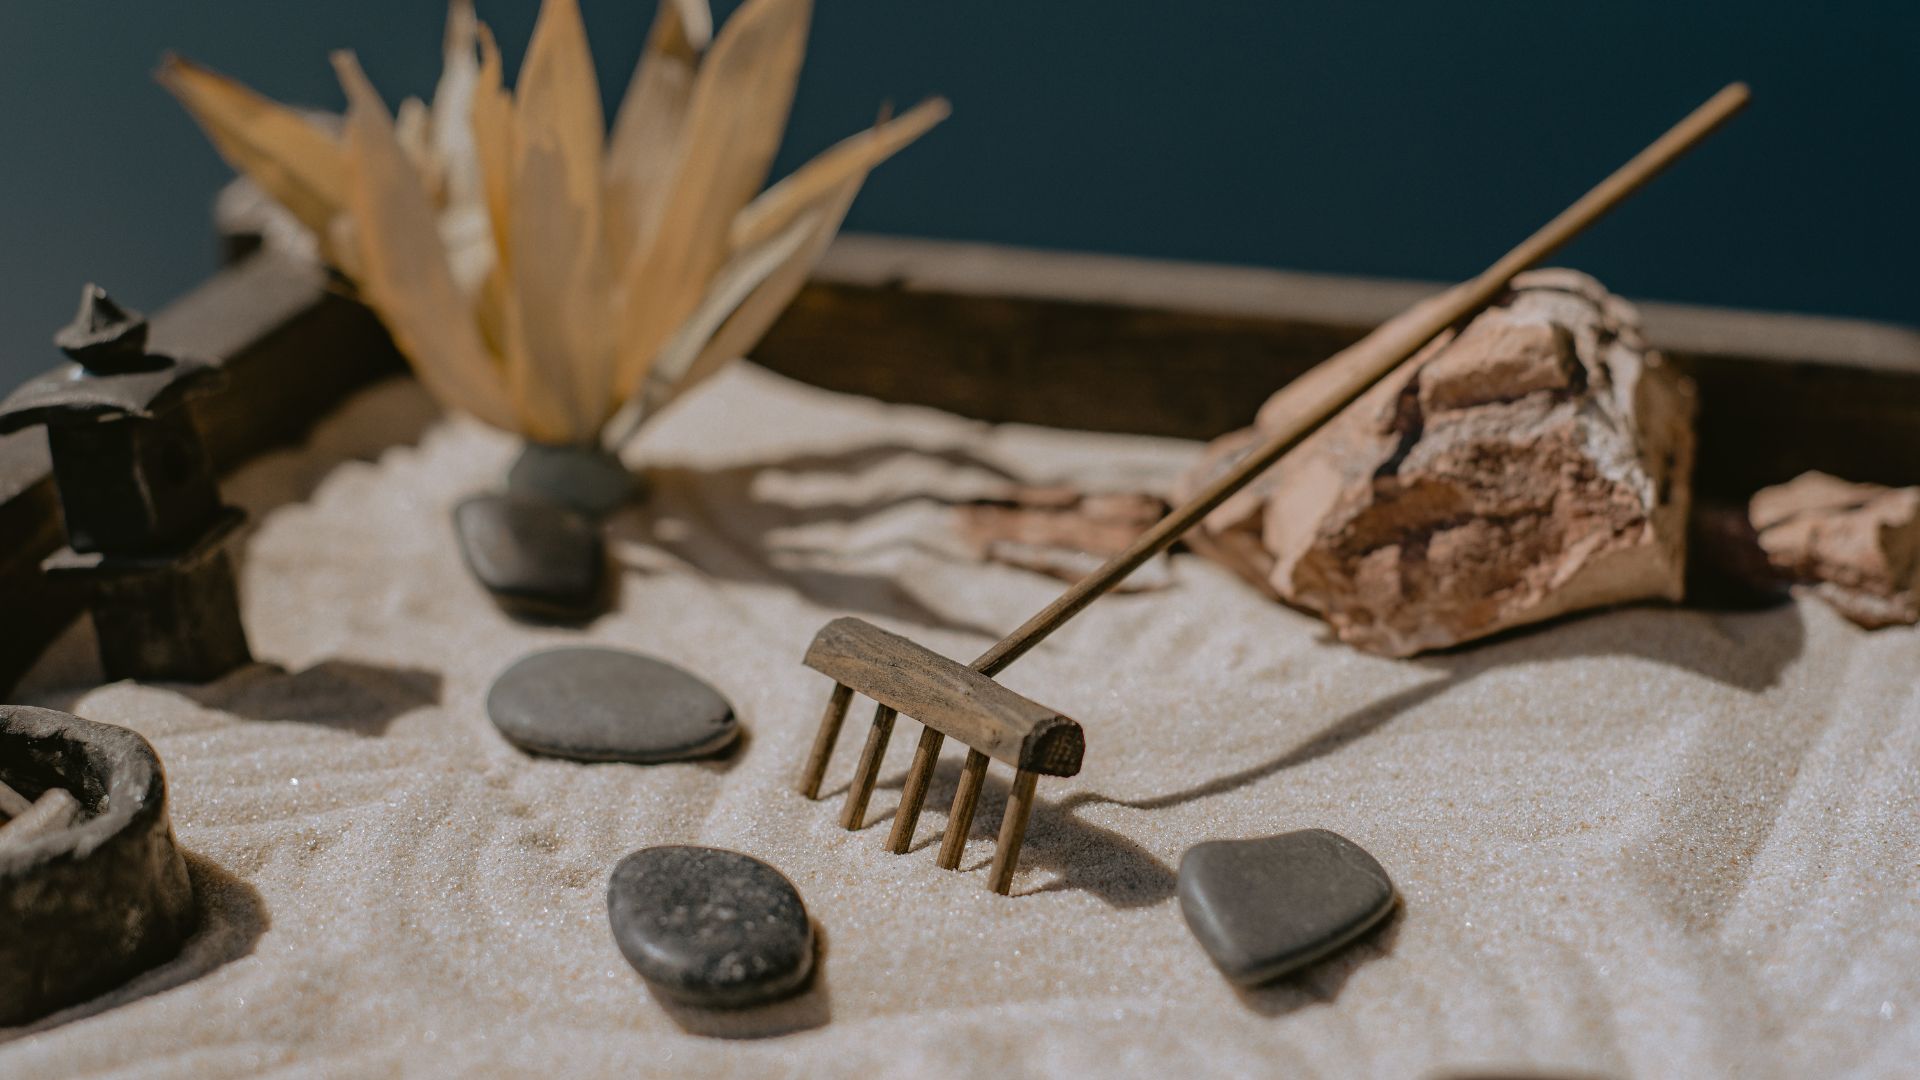 Close-up photo of a Zen garden with sand, rocks and a rake.